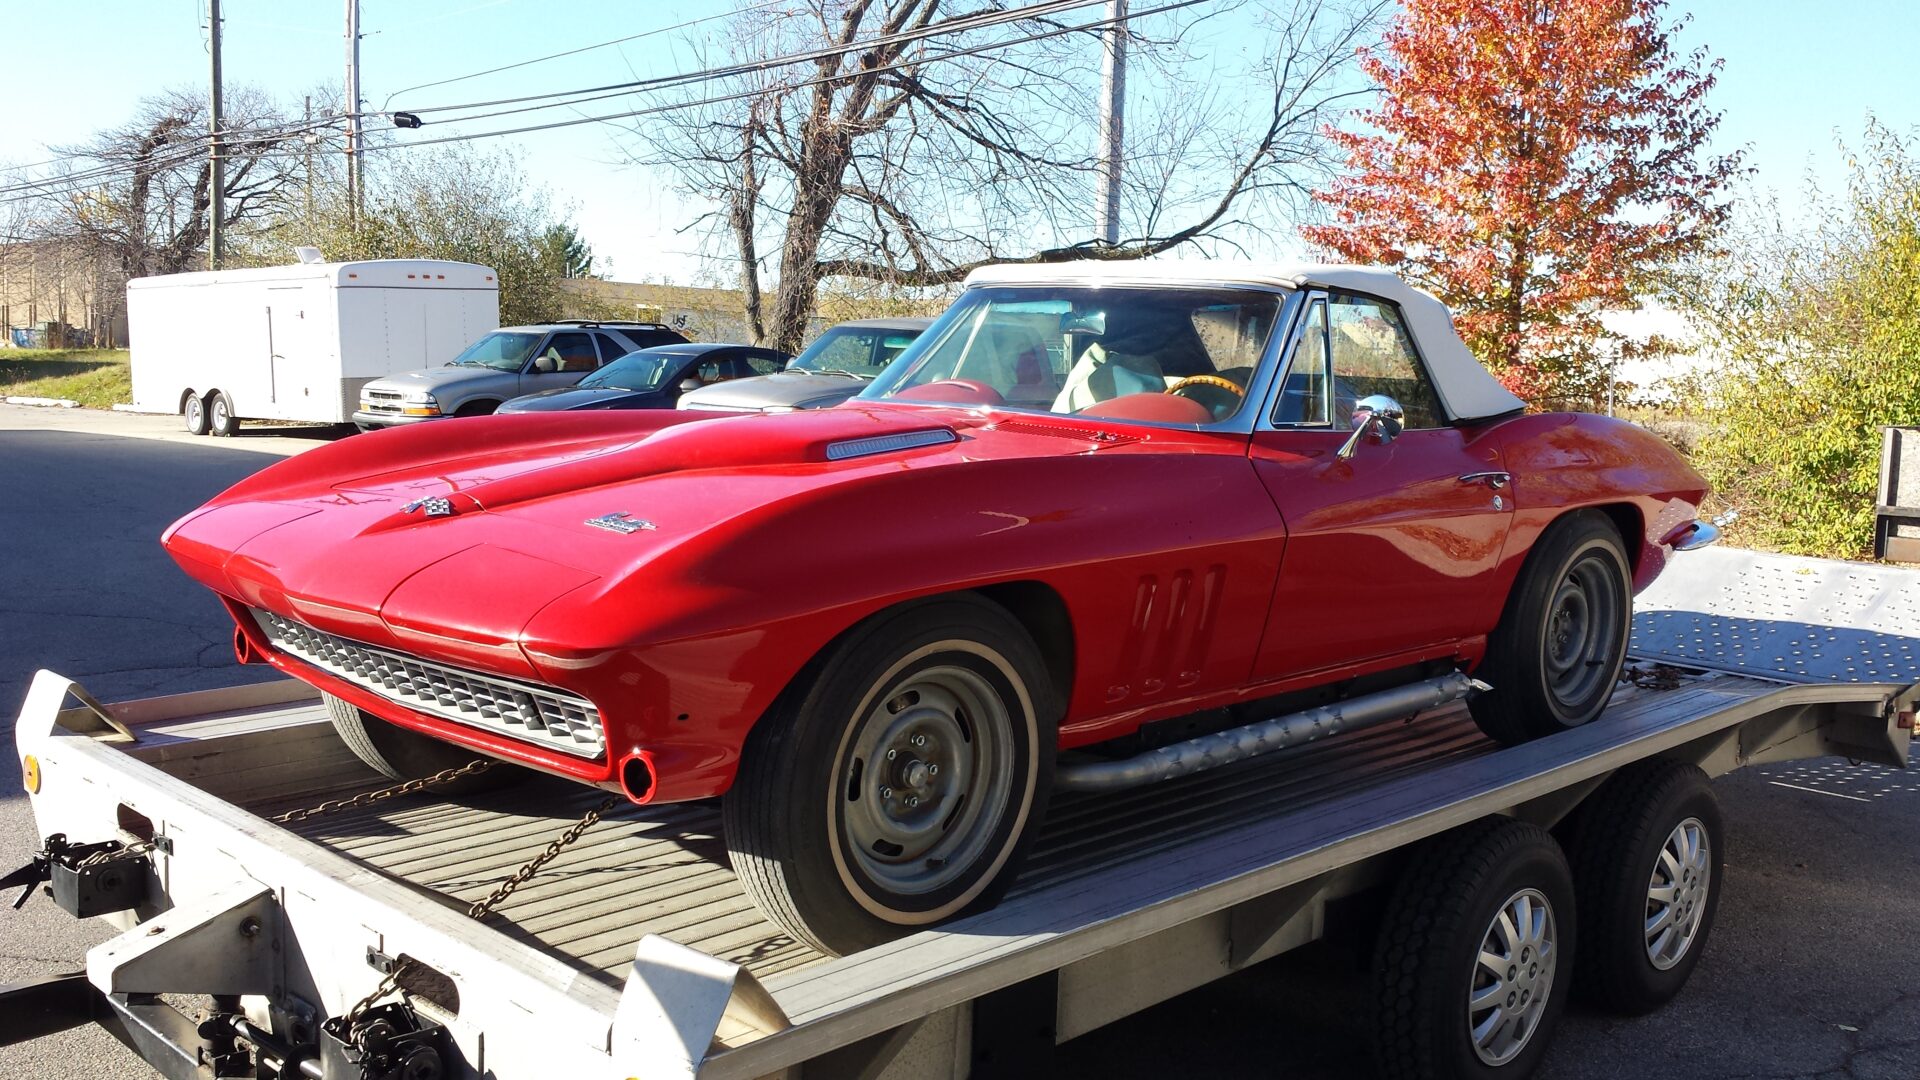 A front view of the 1966 Corvette on transport